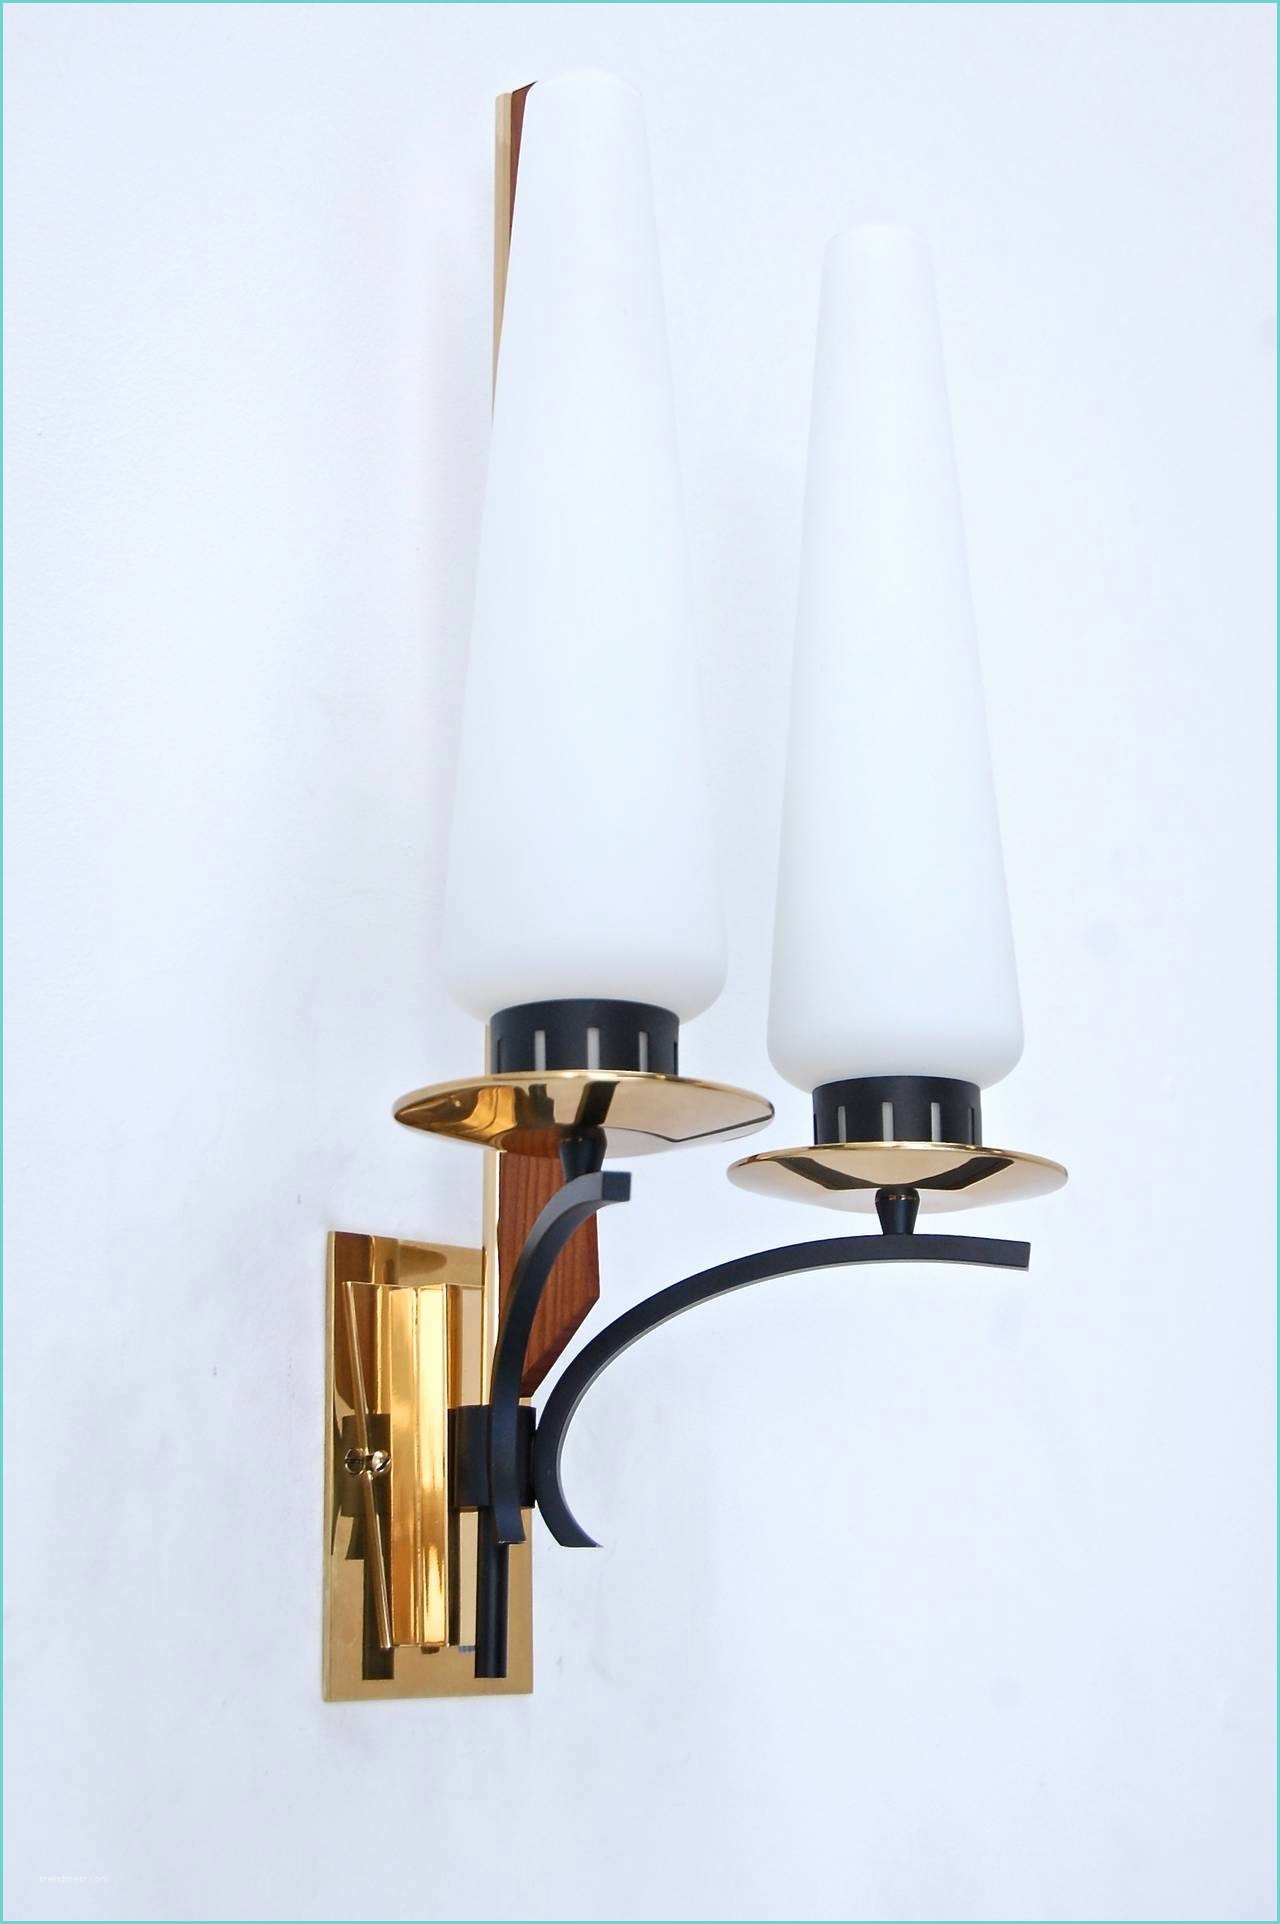 Midcentury Wall Sconce Italian Mid Century Sconce for Sale at 1stdibs